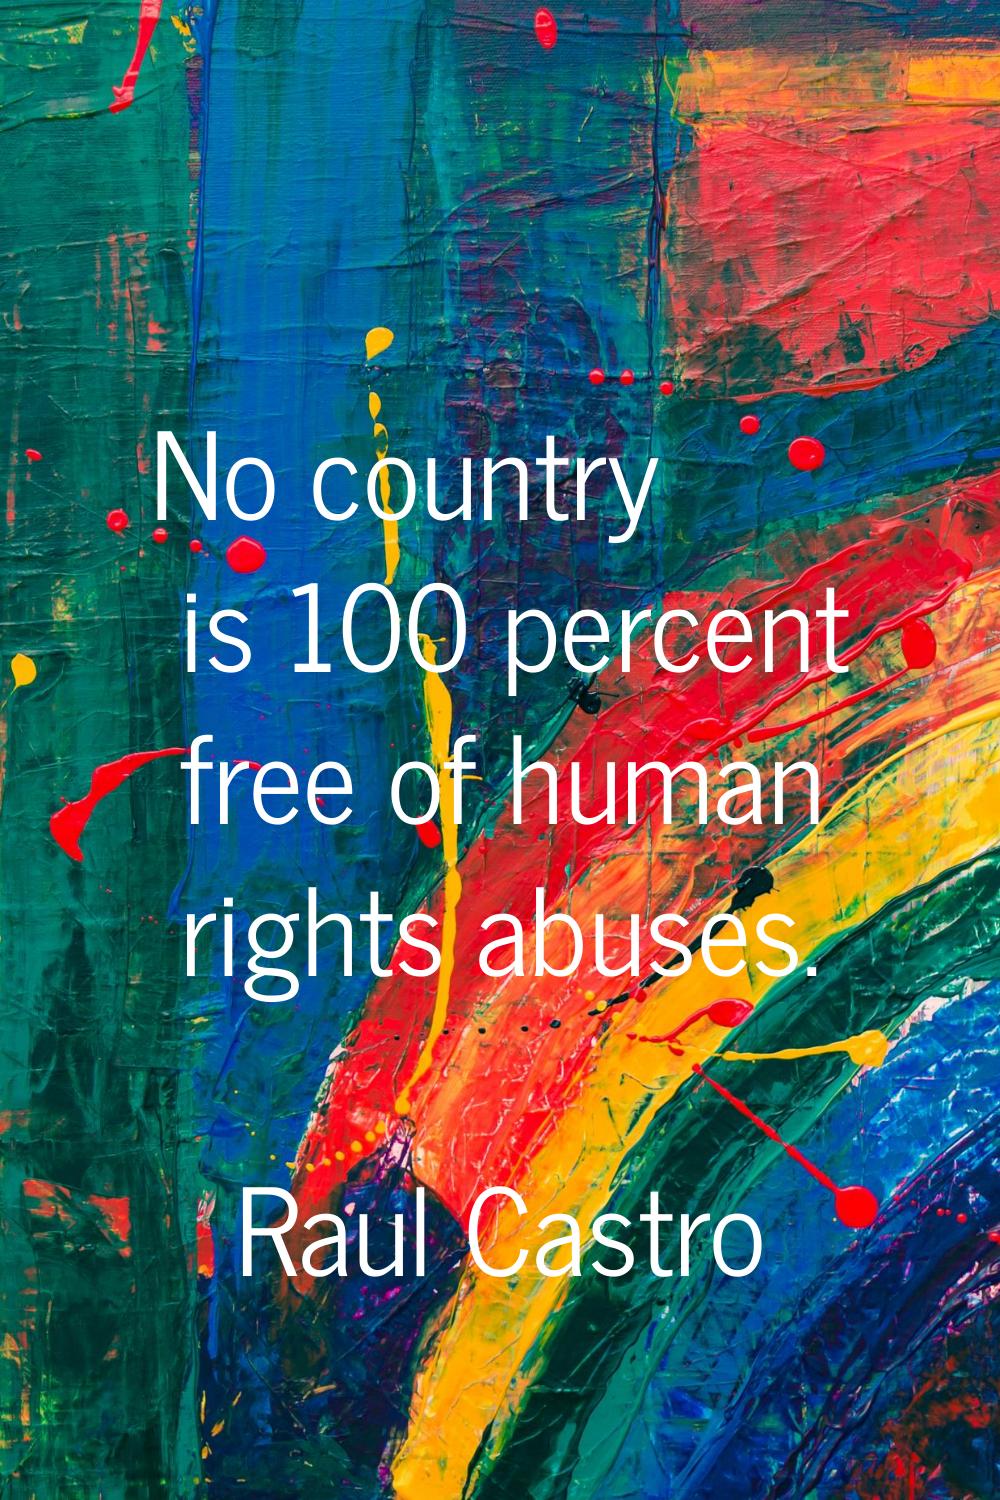 No country is 100 percent free of human rights abuses.